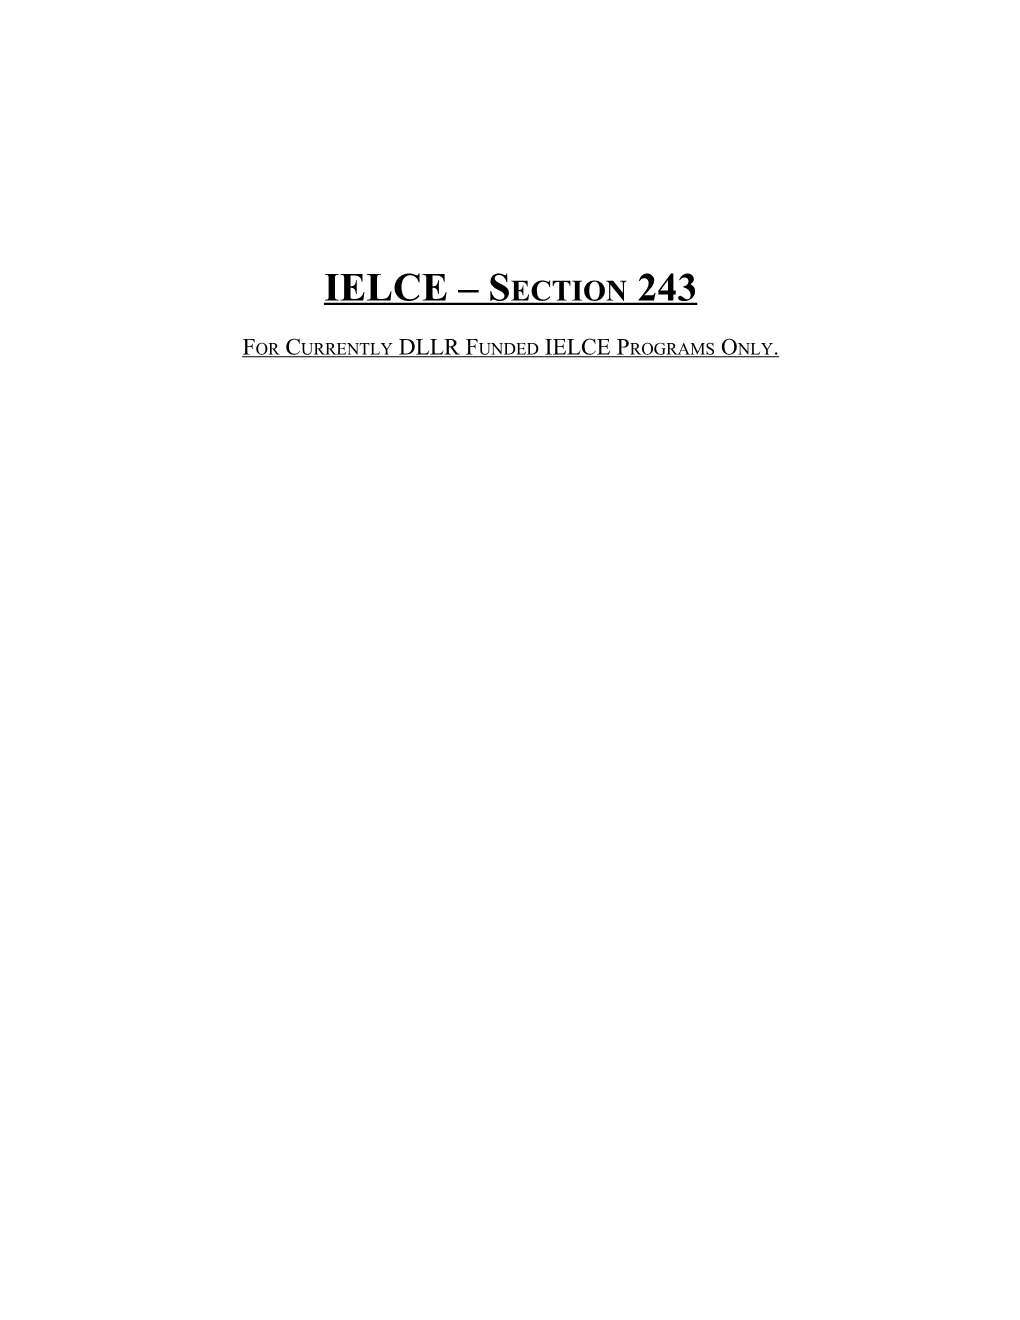 For Currently DLLR Funded IELCE Programs Only